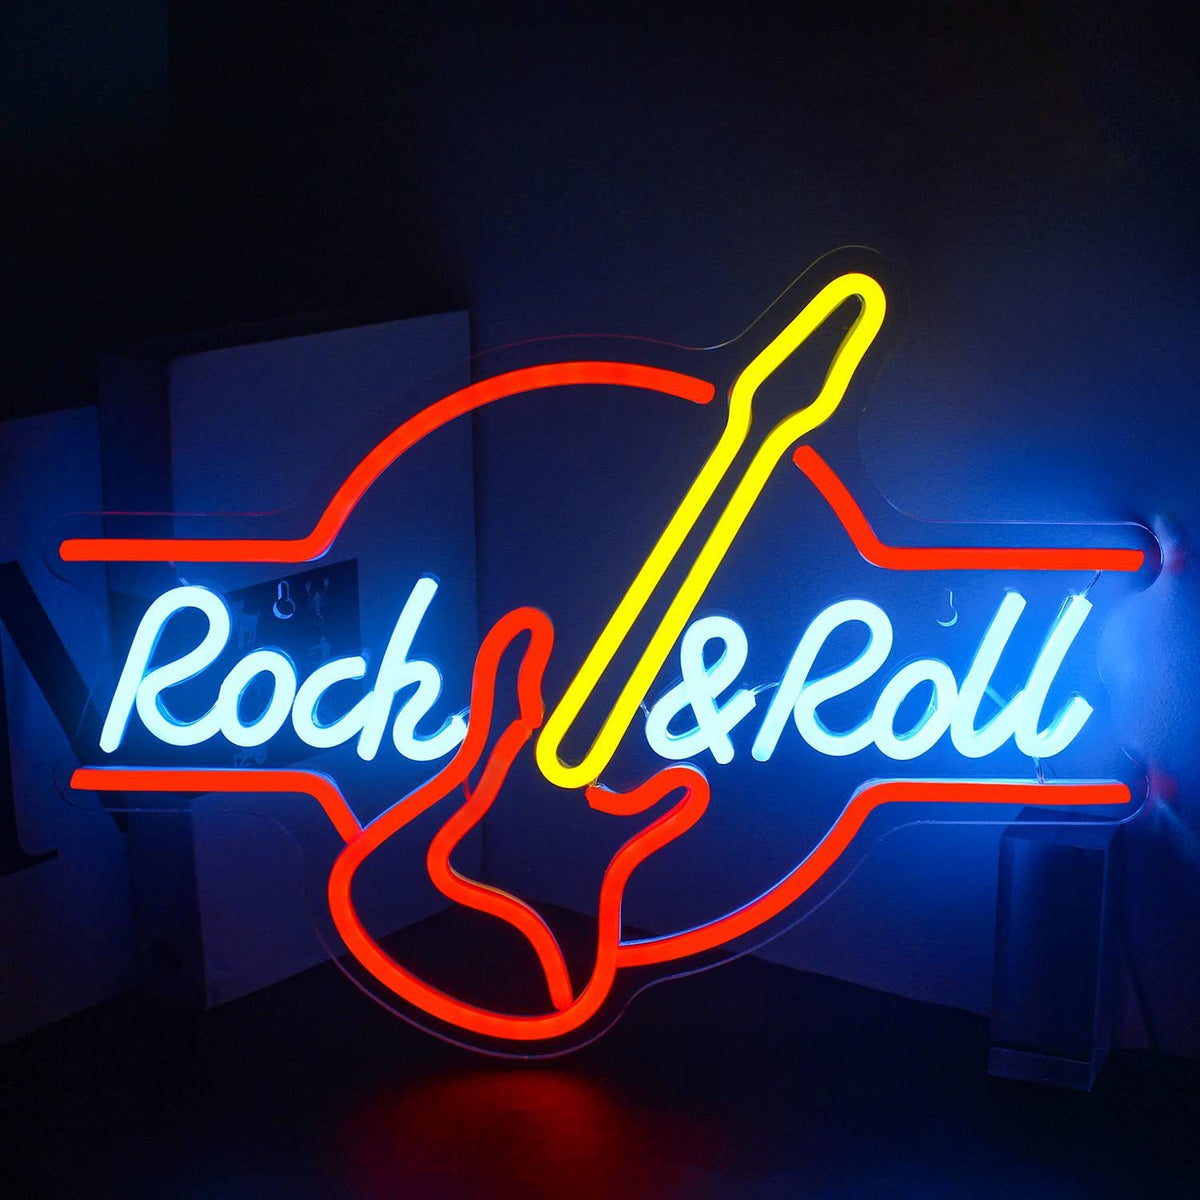 Led Neon Rock And Roll Live Music and Lashes Neon Signs Decorative Neon Lights